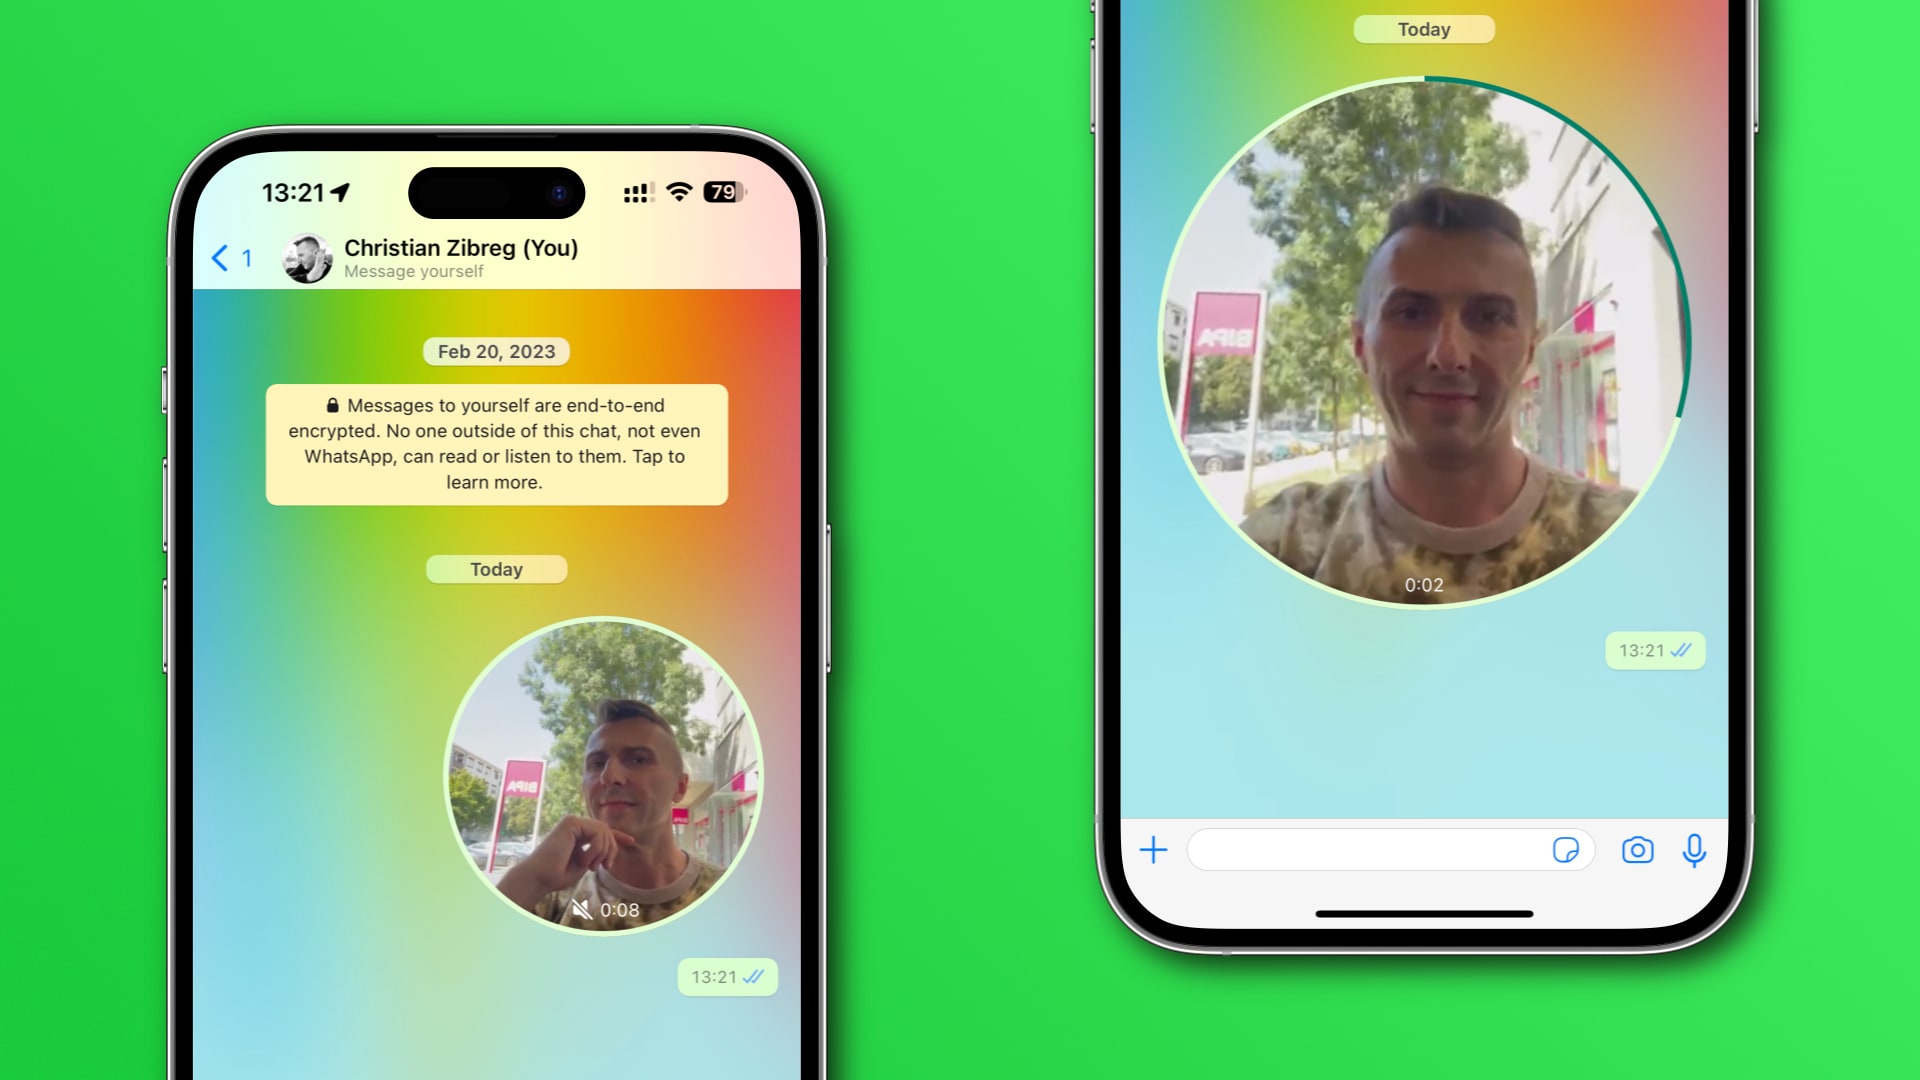 Instant video message in a WhatsApp chat